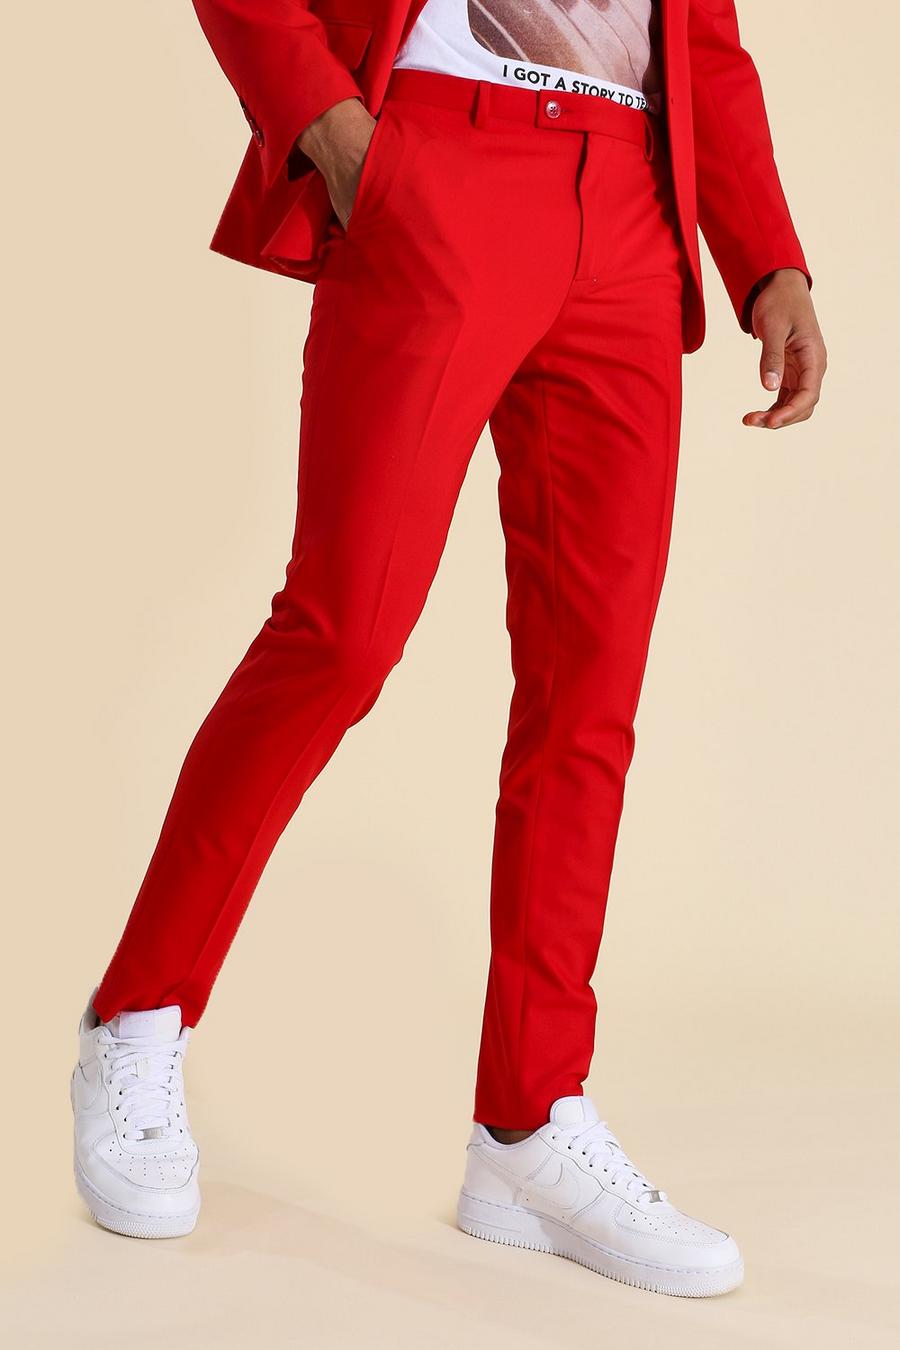 Pantaloni completo Skinny Fit rossi, Rosso red